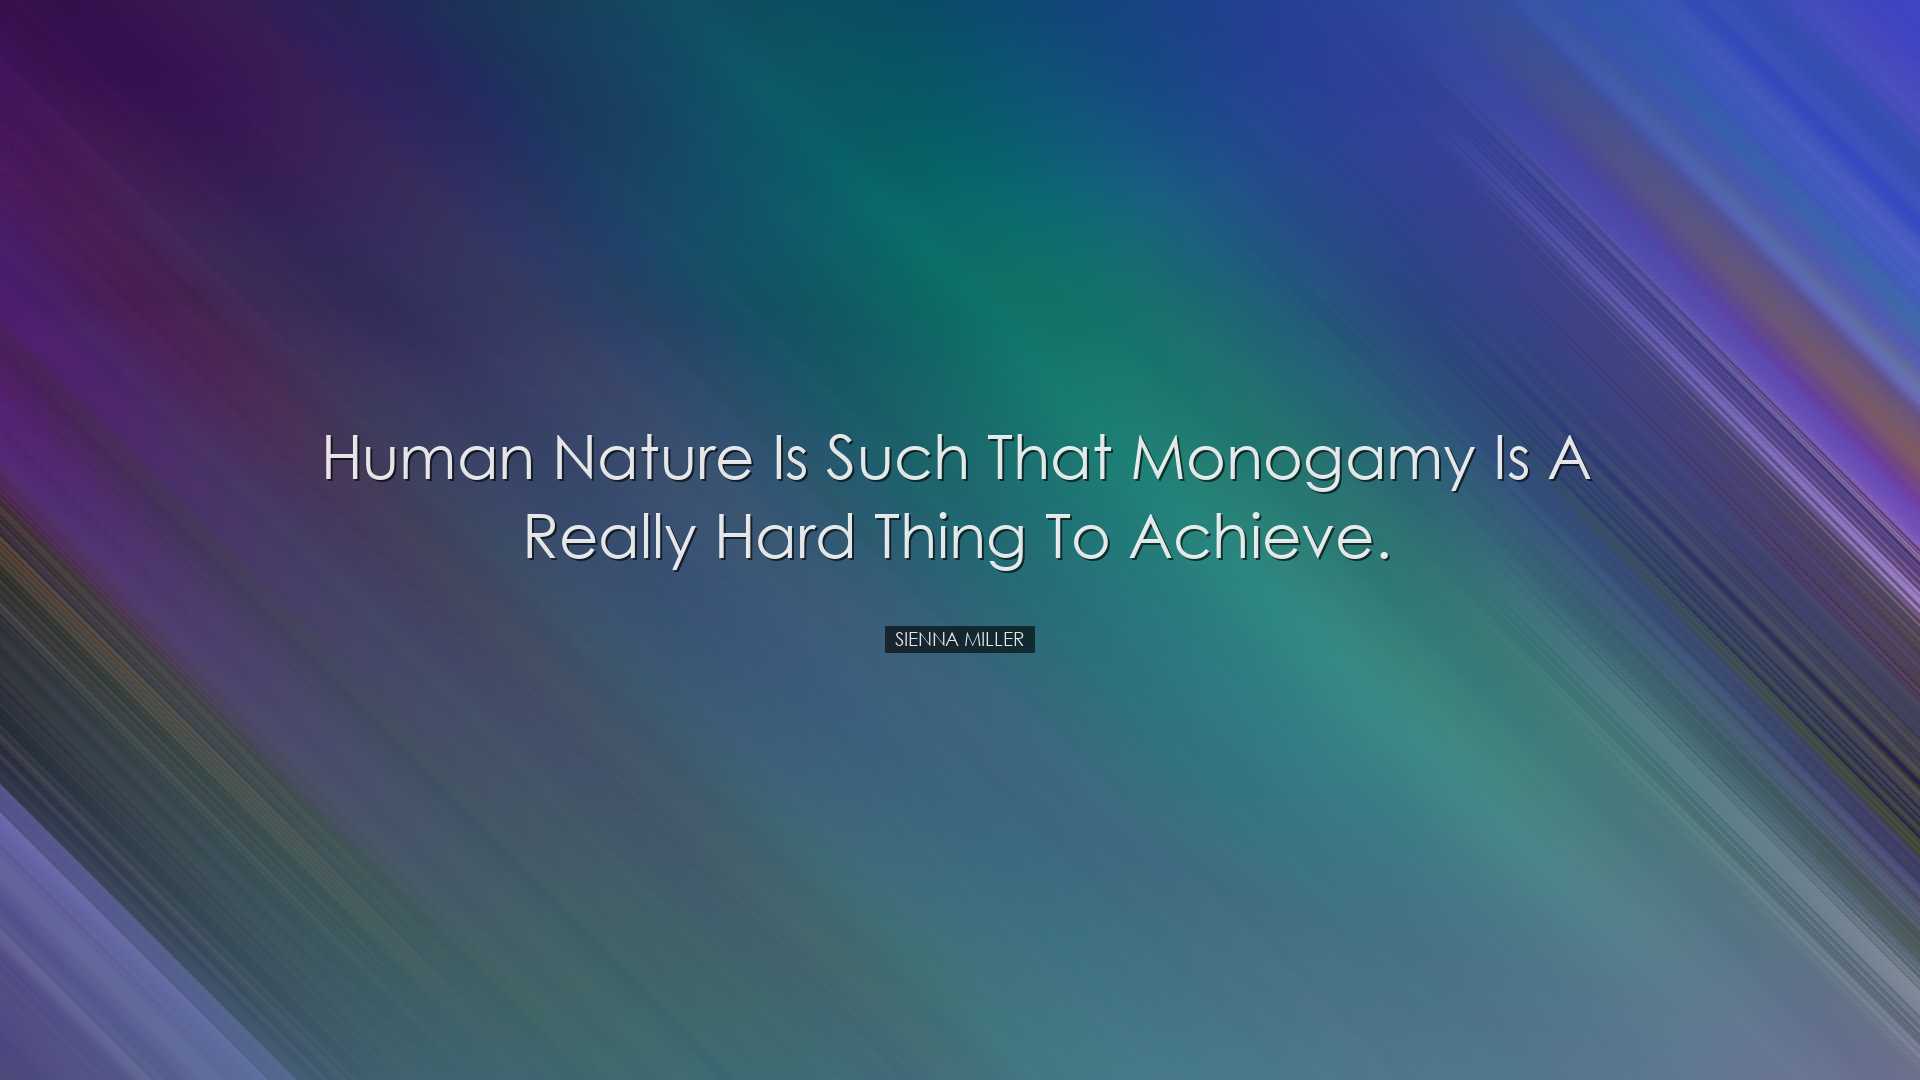 Human nature is such that monogamy is a really hard thing to achie